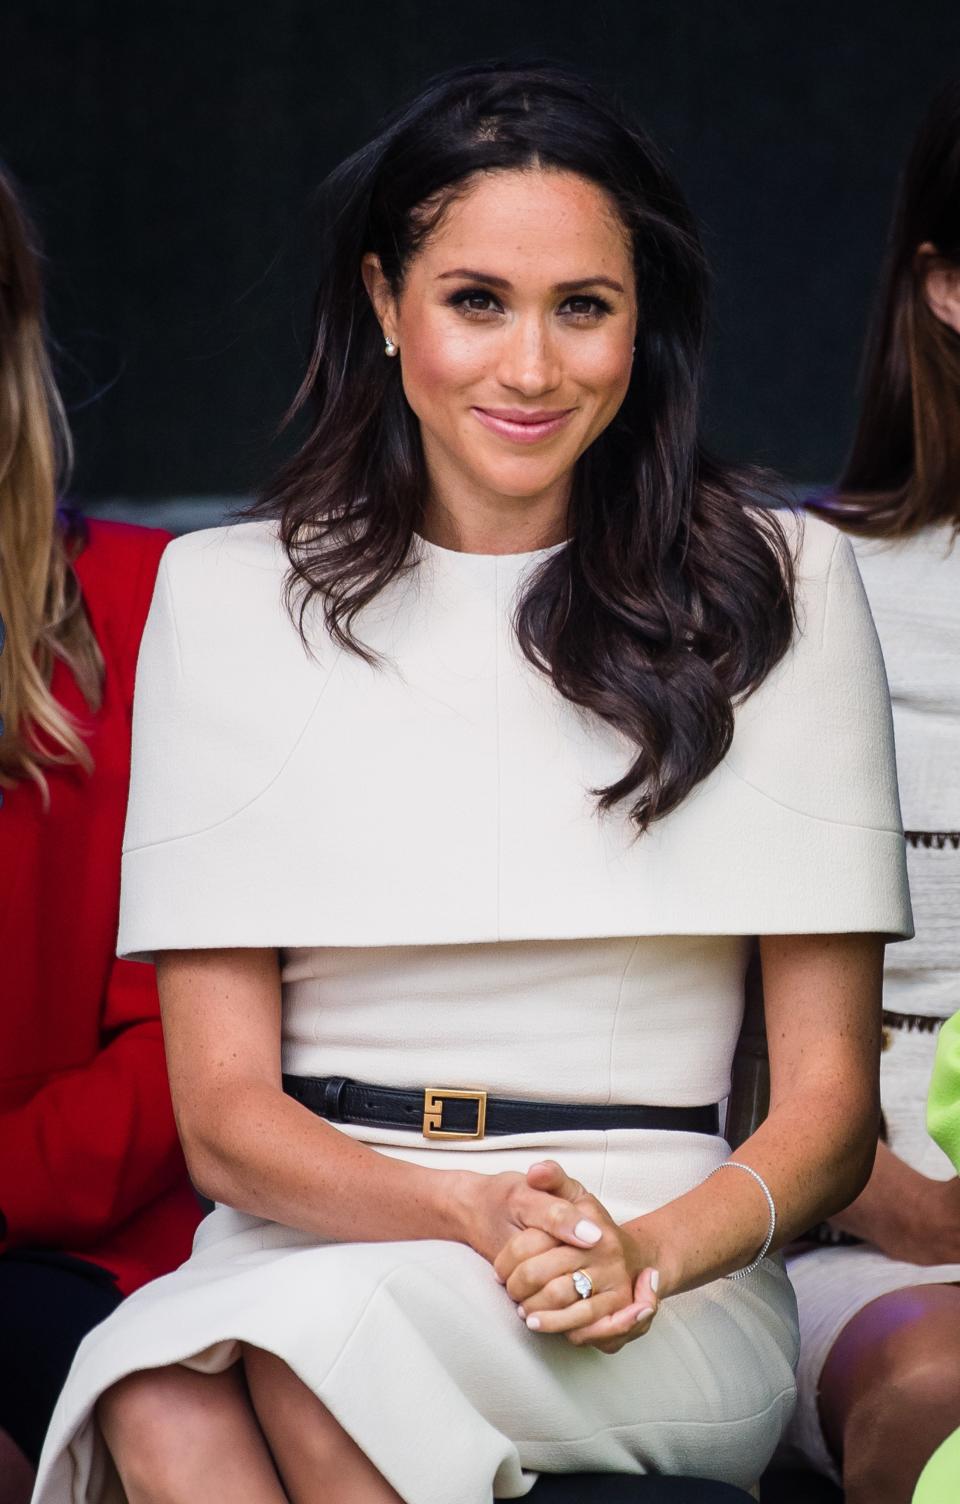 Meghan Markle at the opening of the Mersey Gateway Bridge